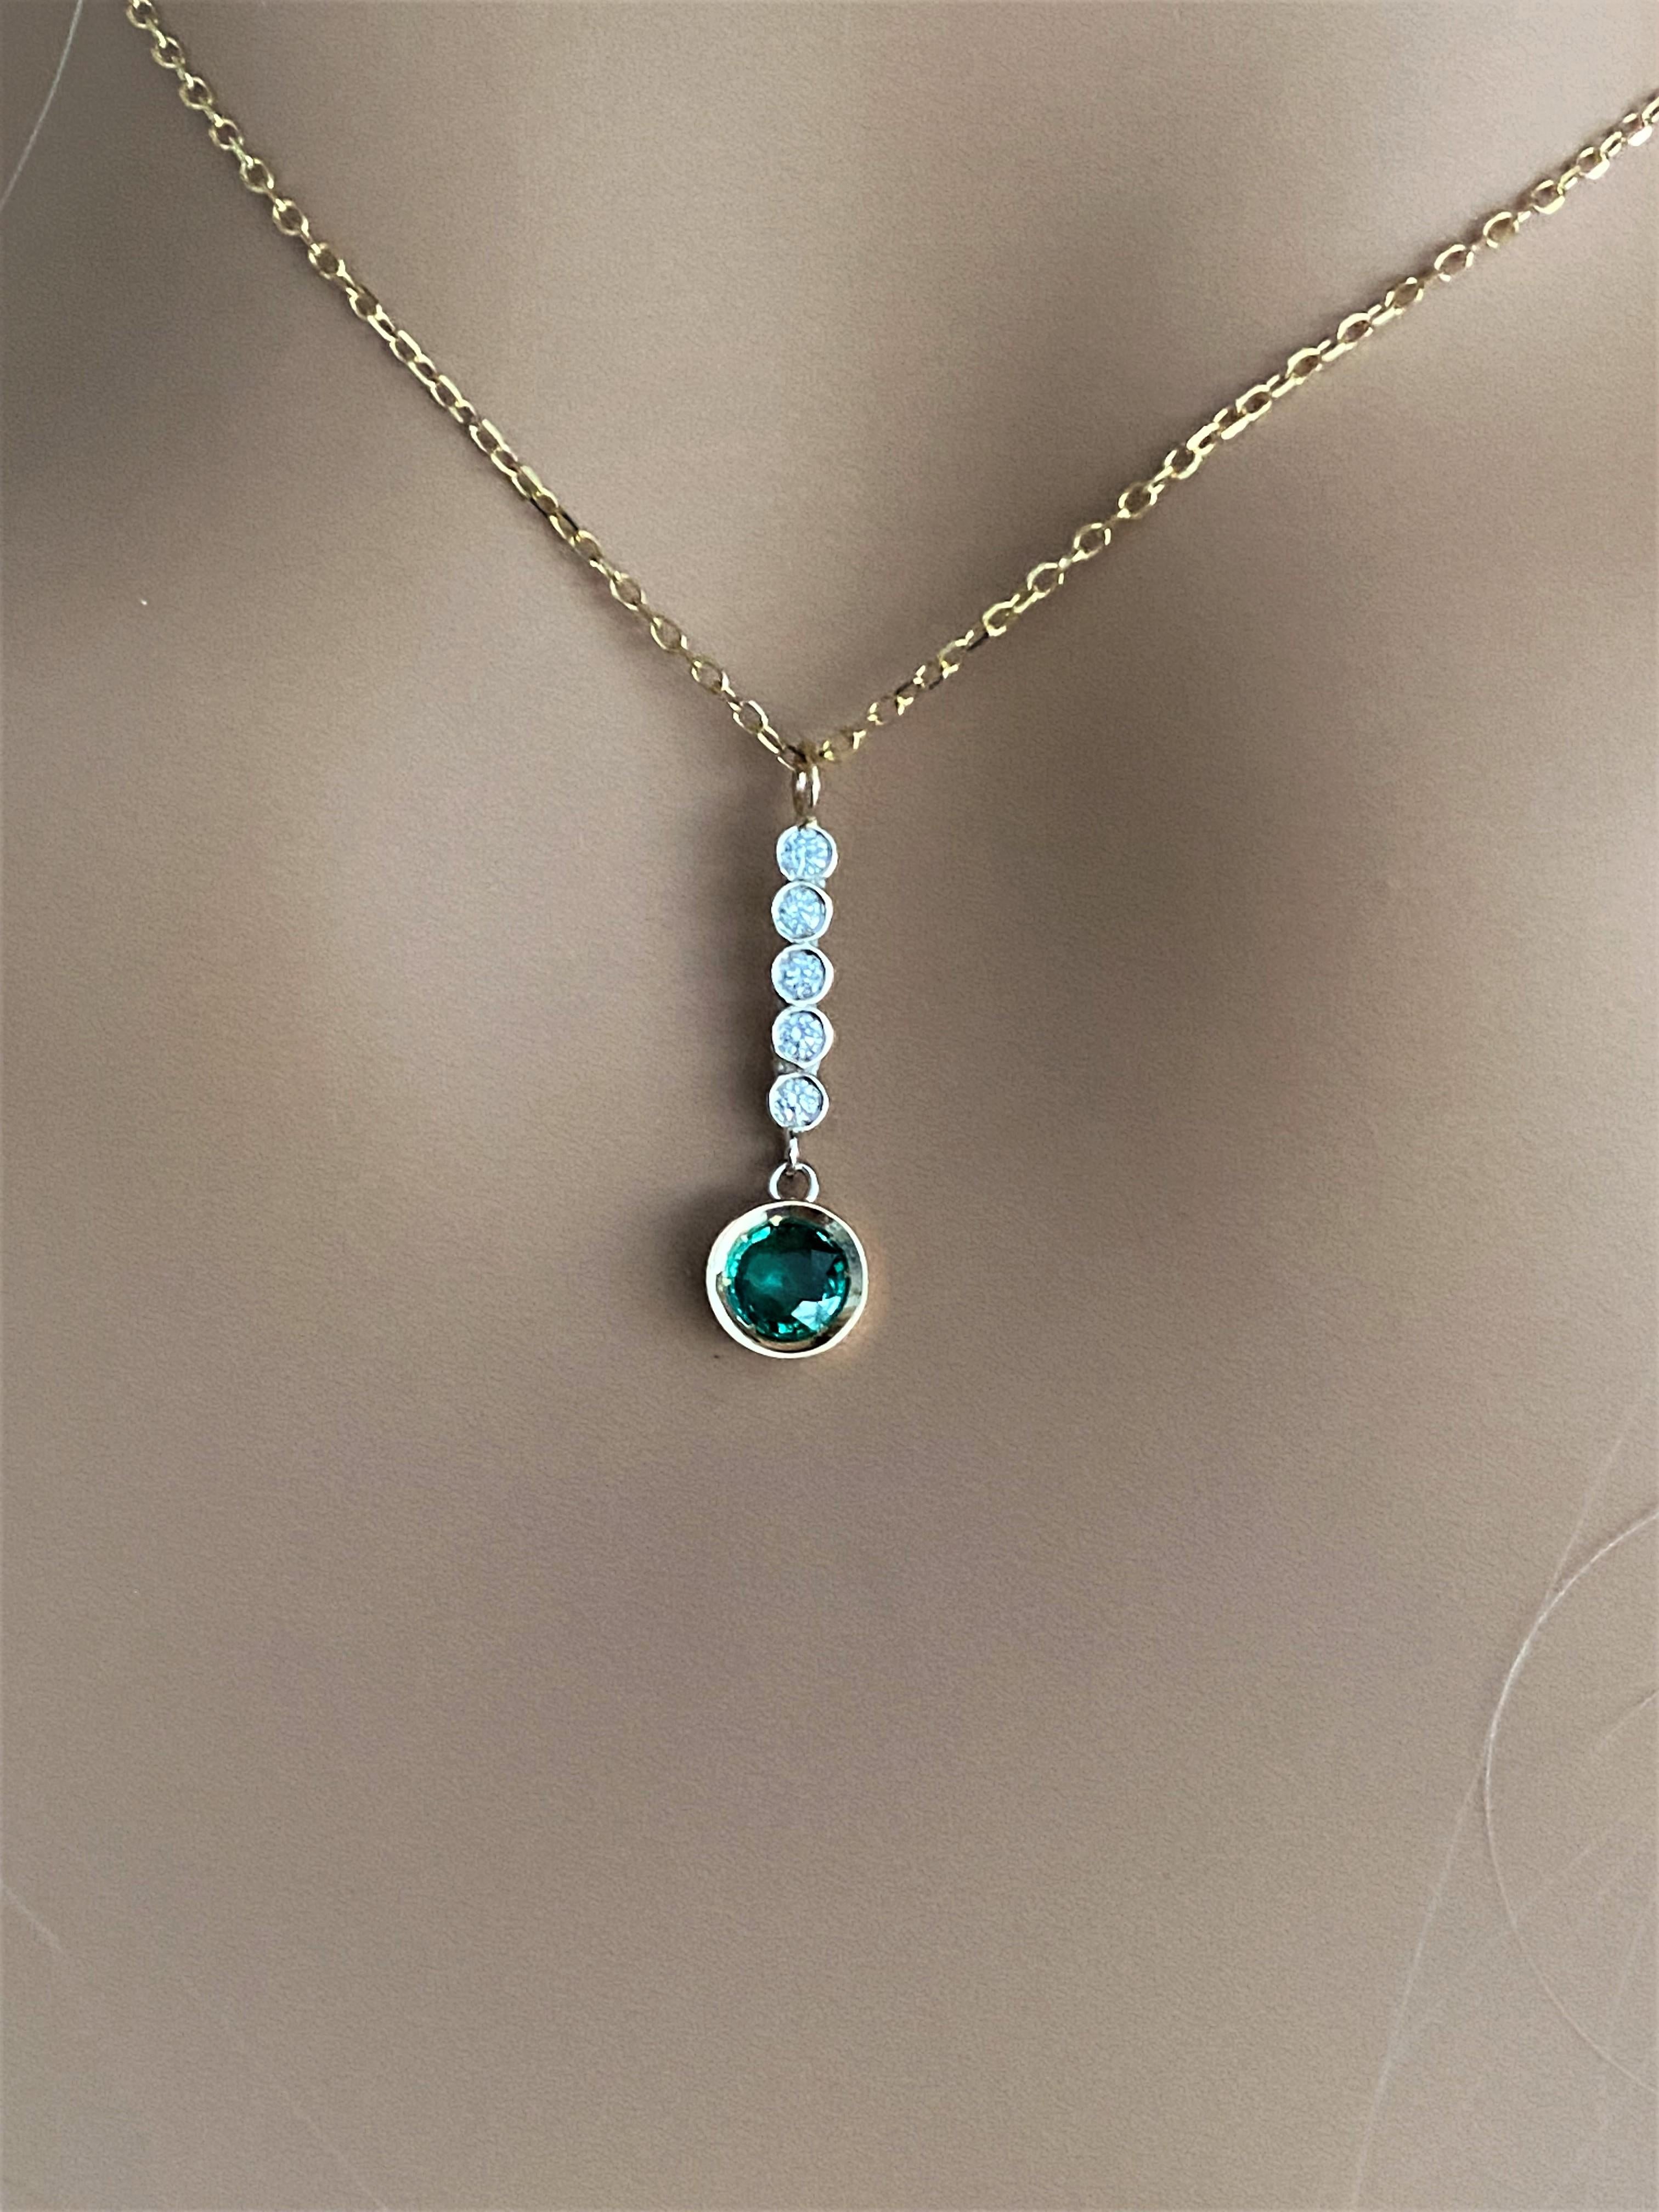 Fourteen karats white and yellow gold trending lariat necklace pendant 
One round emerald bezel set weighing 0.40 carats
Drop diamond bar weighing 0.10 
Emerald hue tone color grass green
Chain measuring 16 inches long
Diamond drop lariat measuring